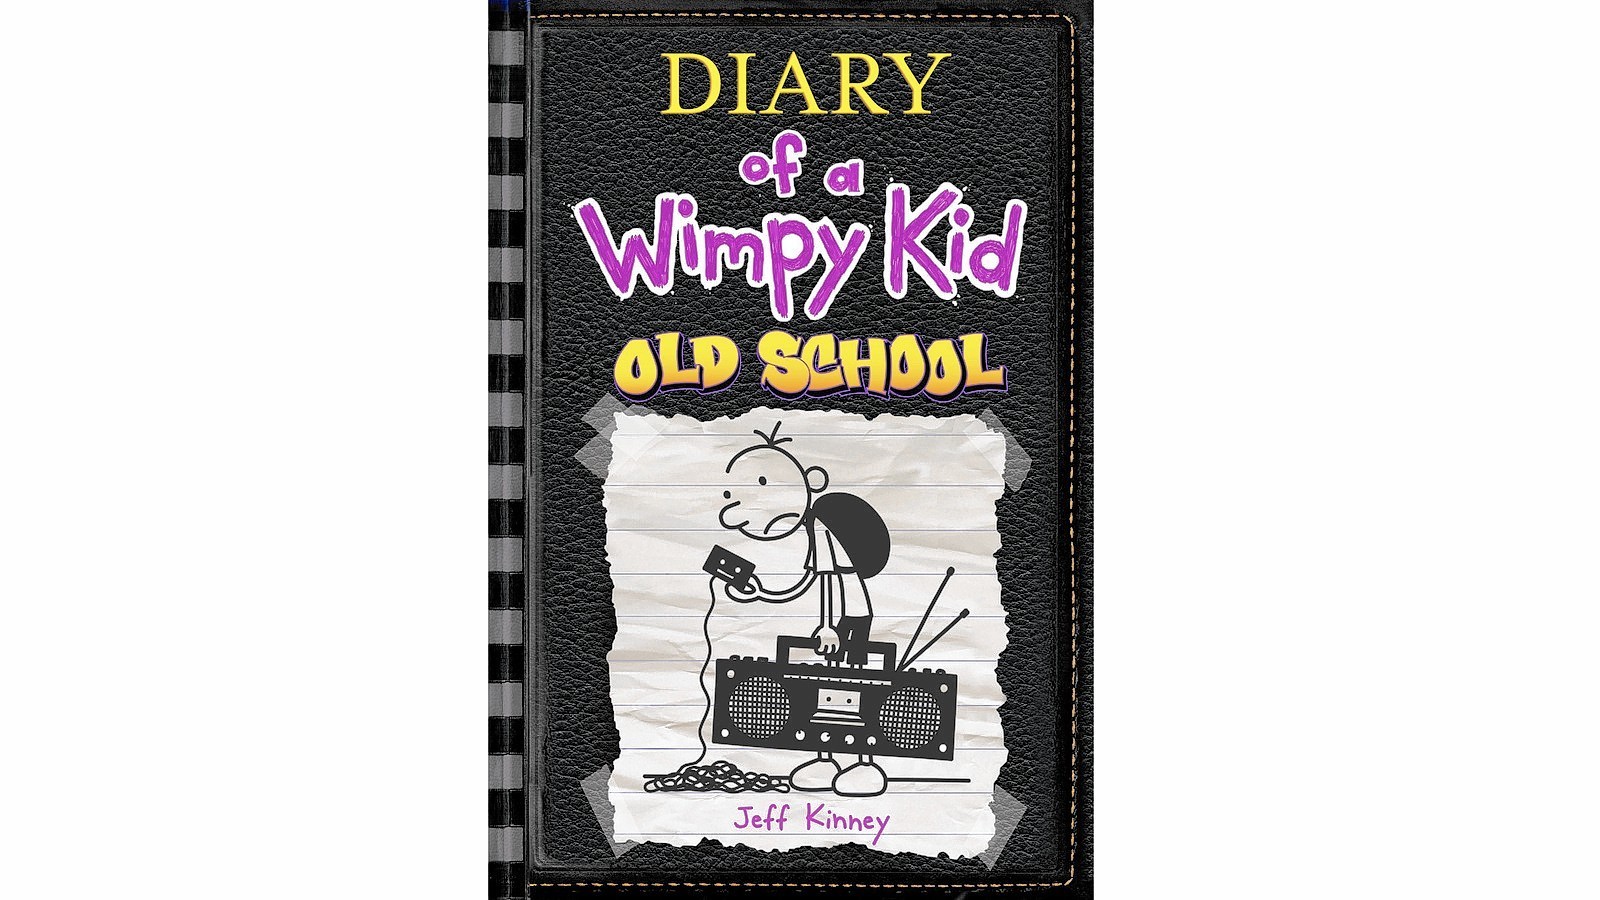 So what are kids reading these days? A whole lot of 'Wimpy Kid